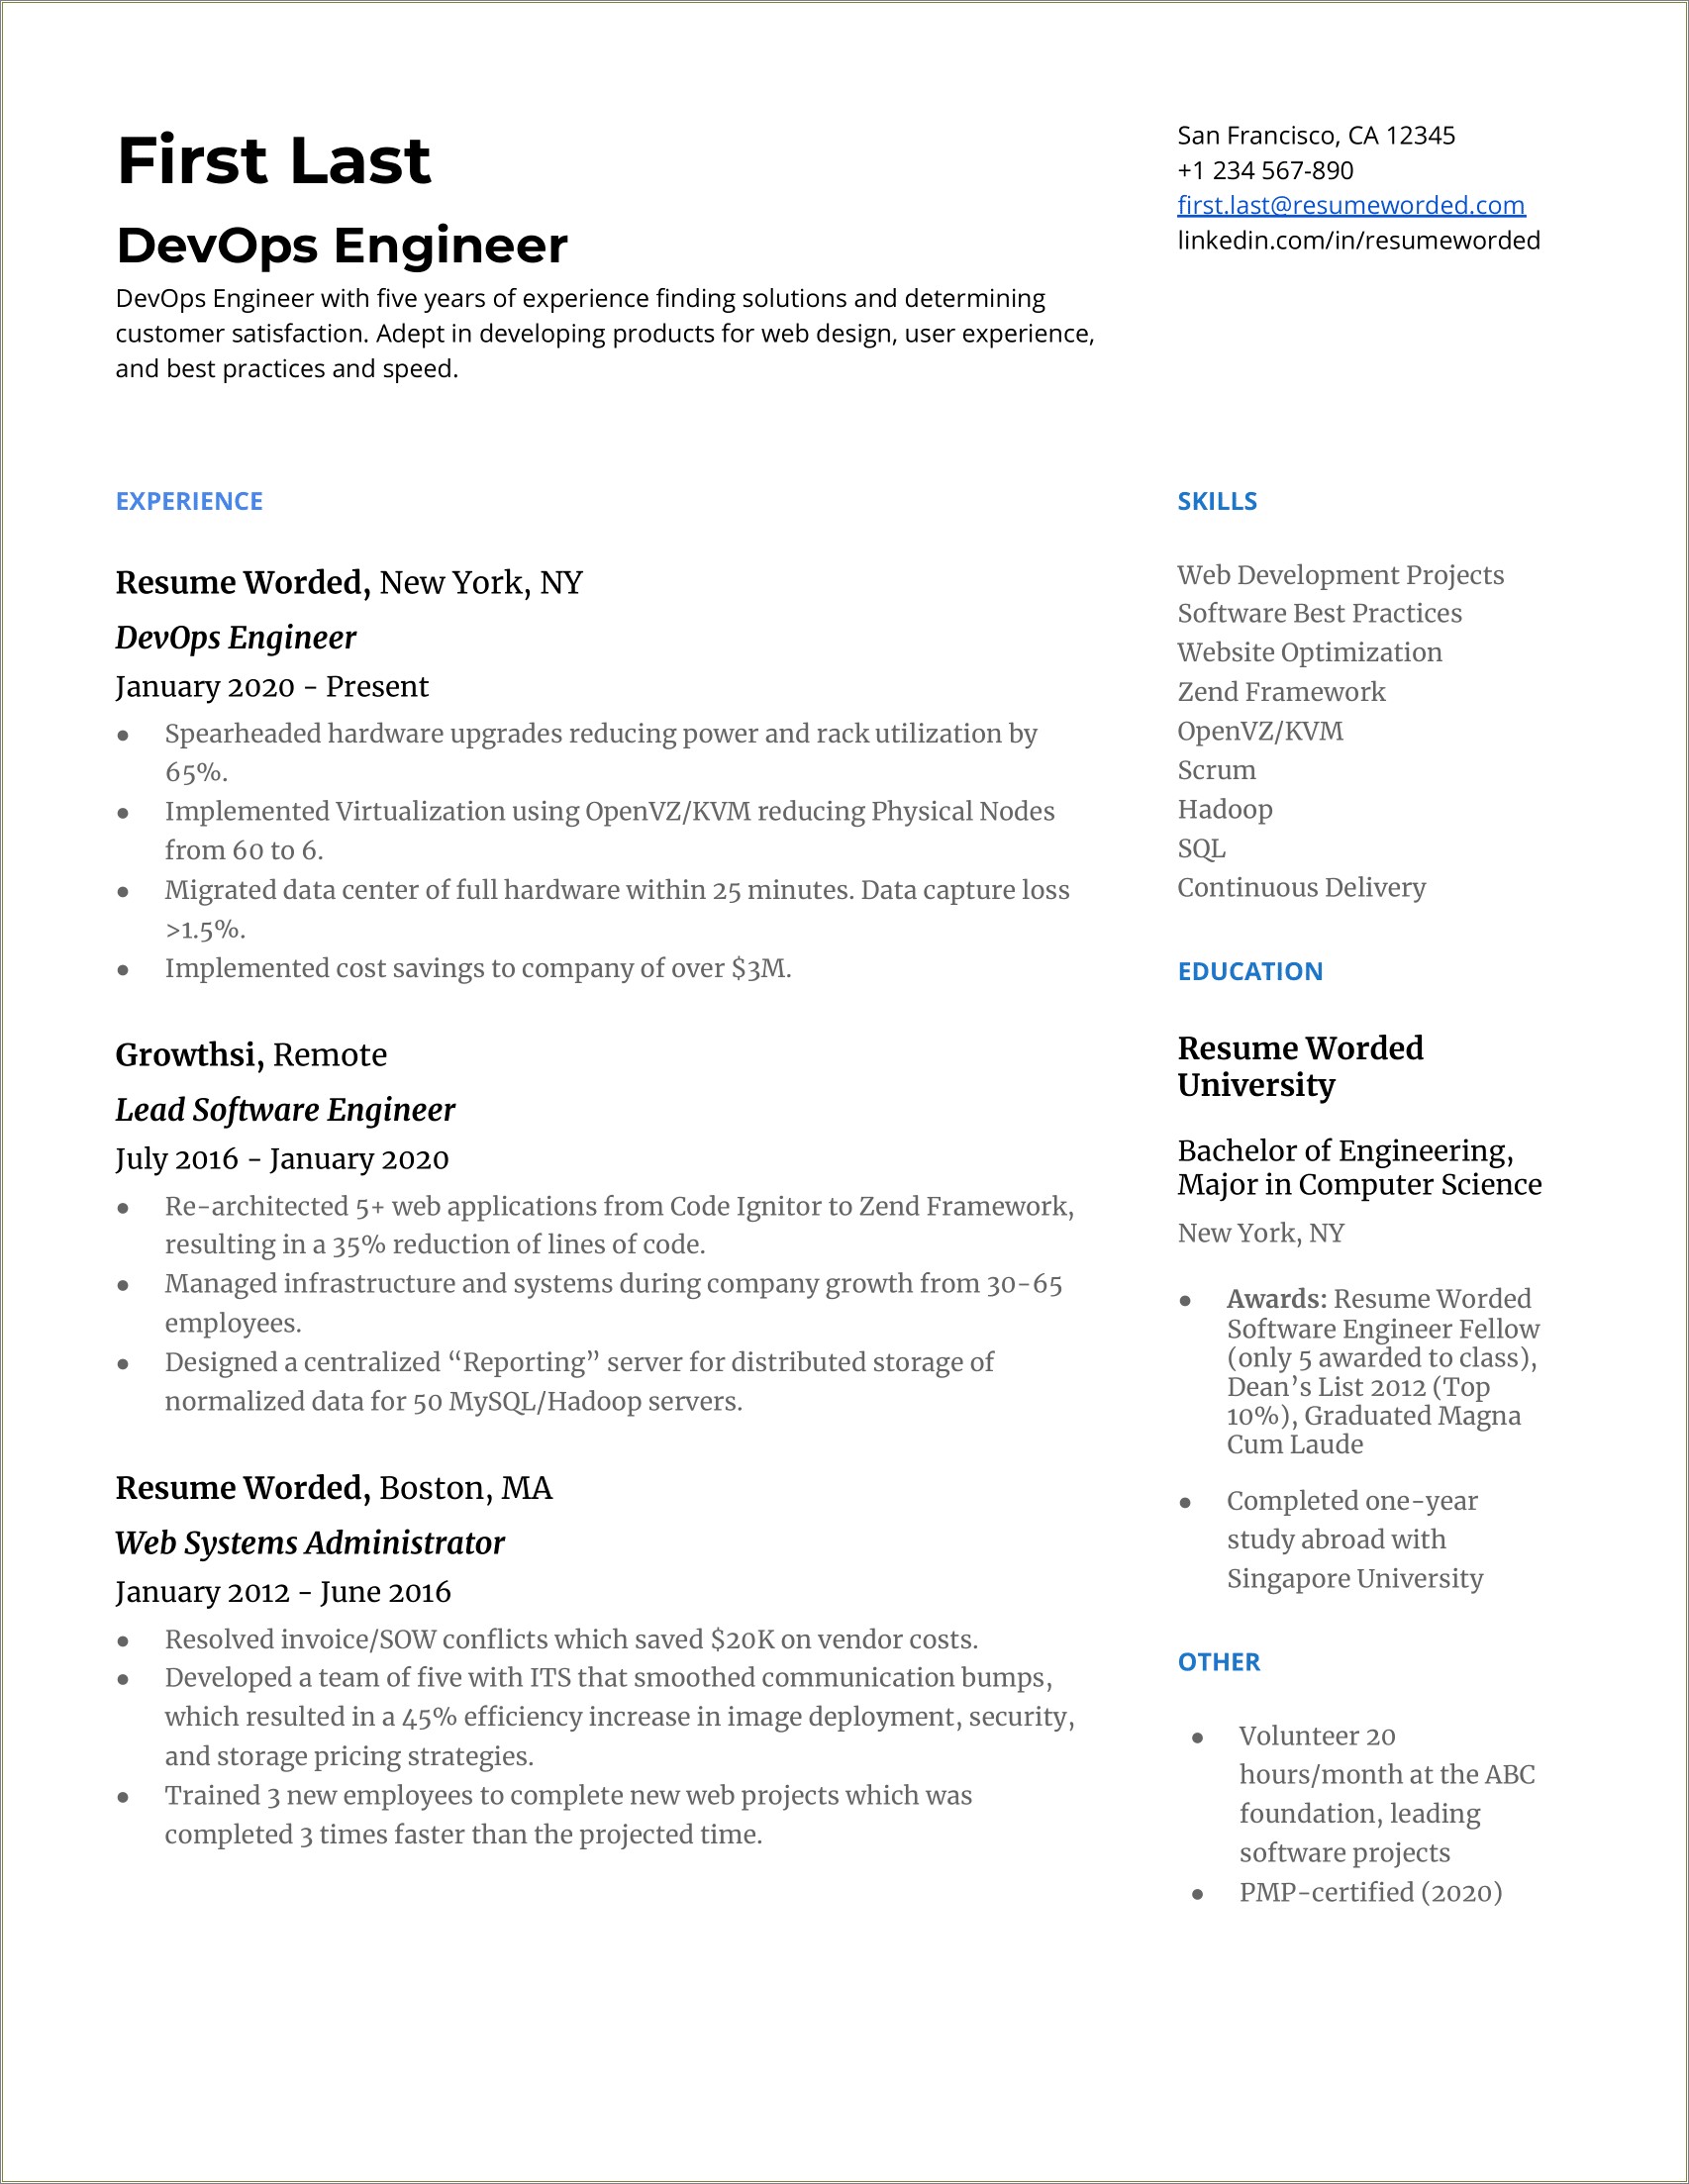 Devops Engineer Aws Resume For 8 Years Experience